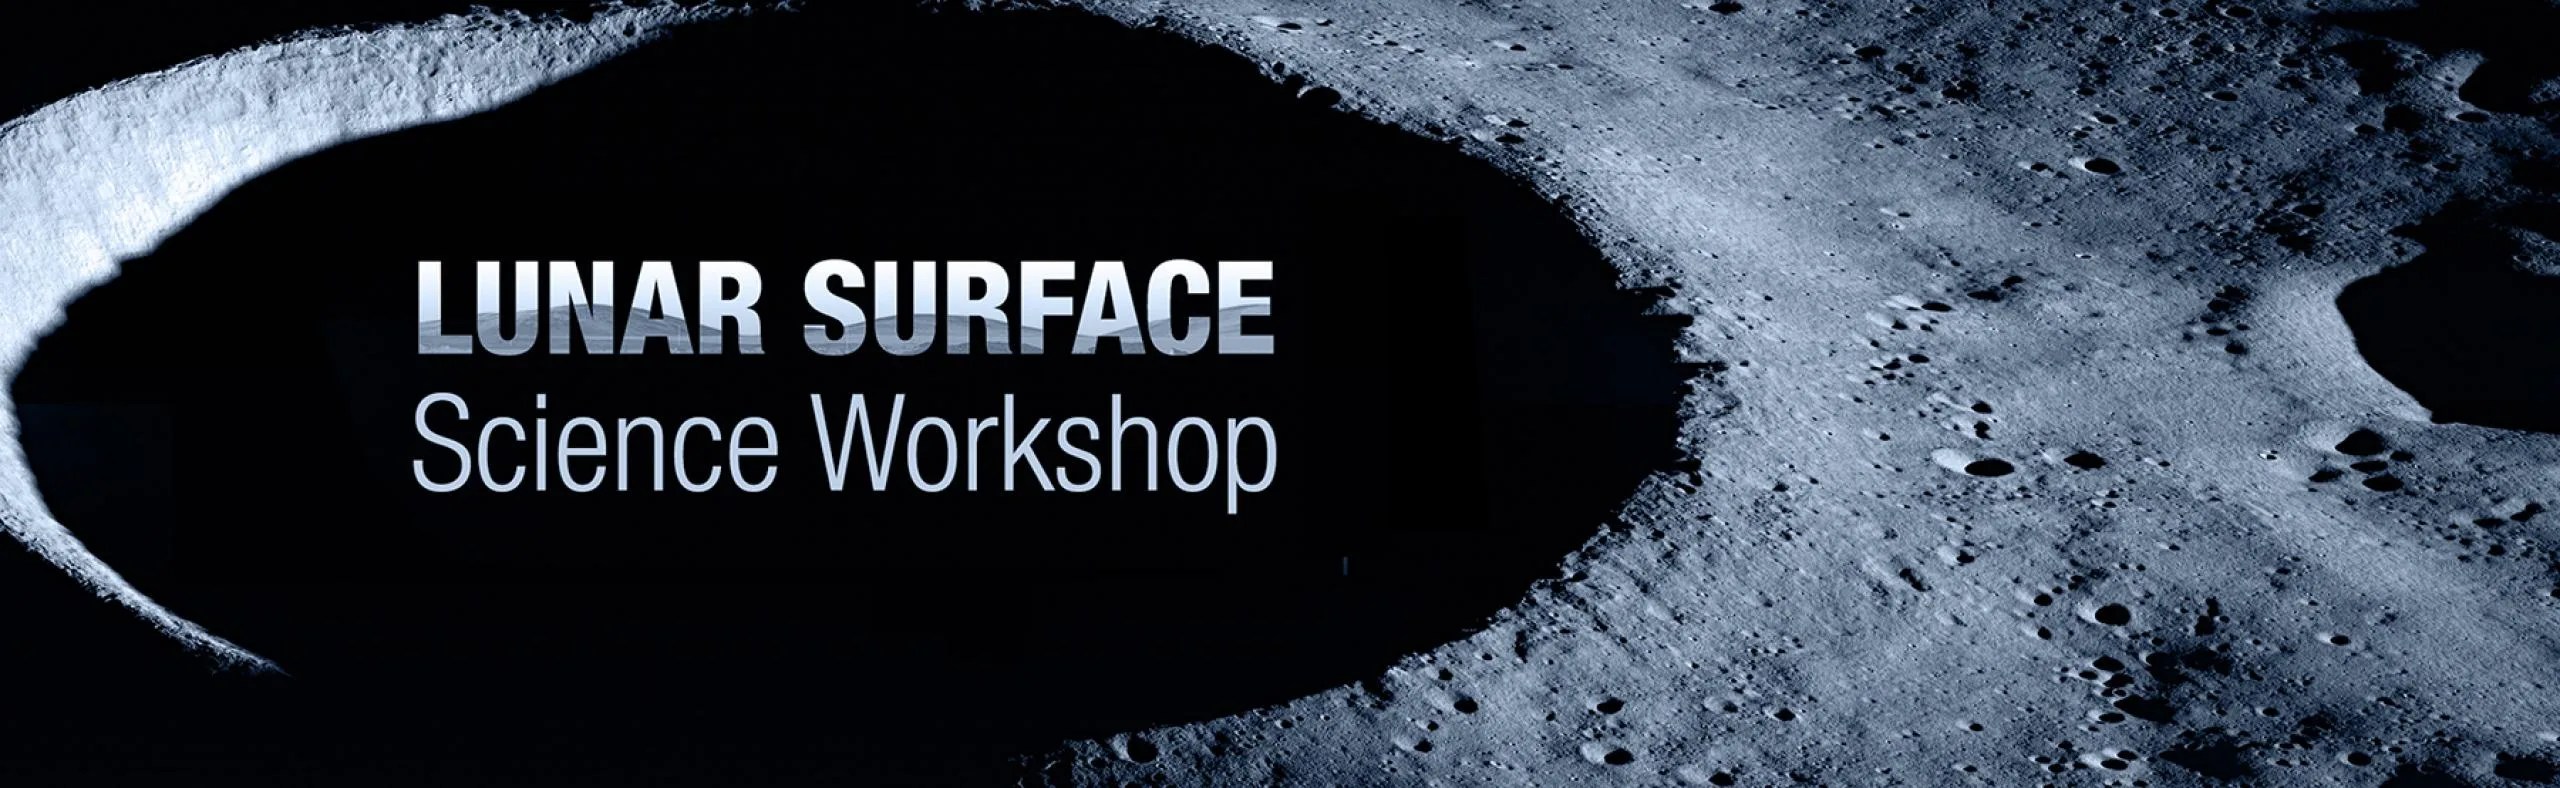 Banner entitled Lunar Surface Science Workshop with the image of the moon surface